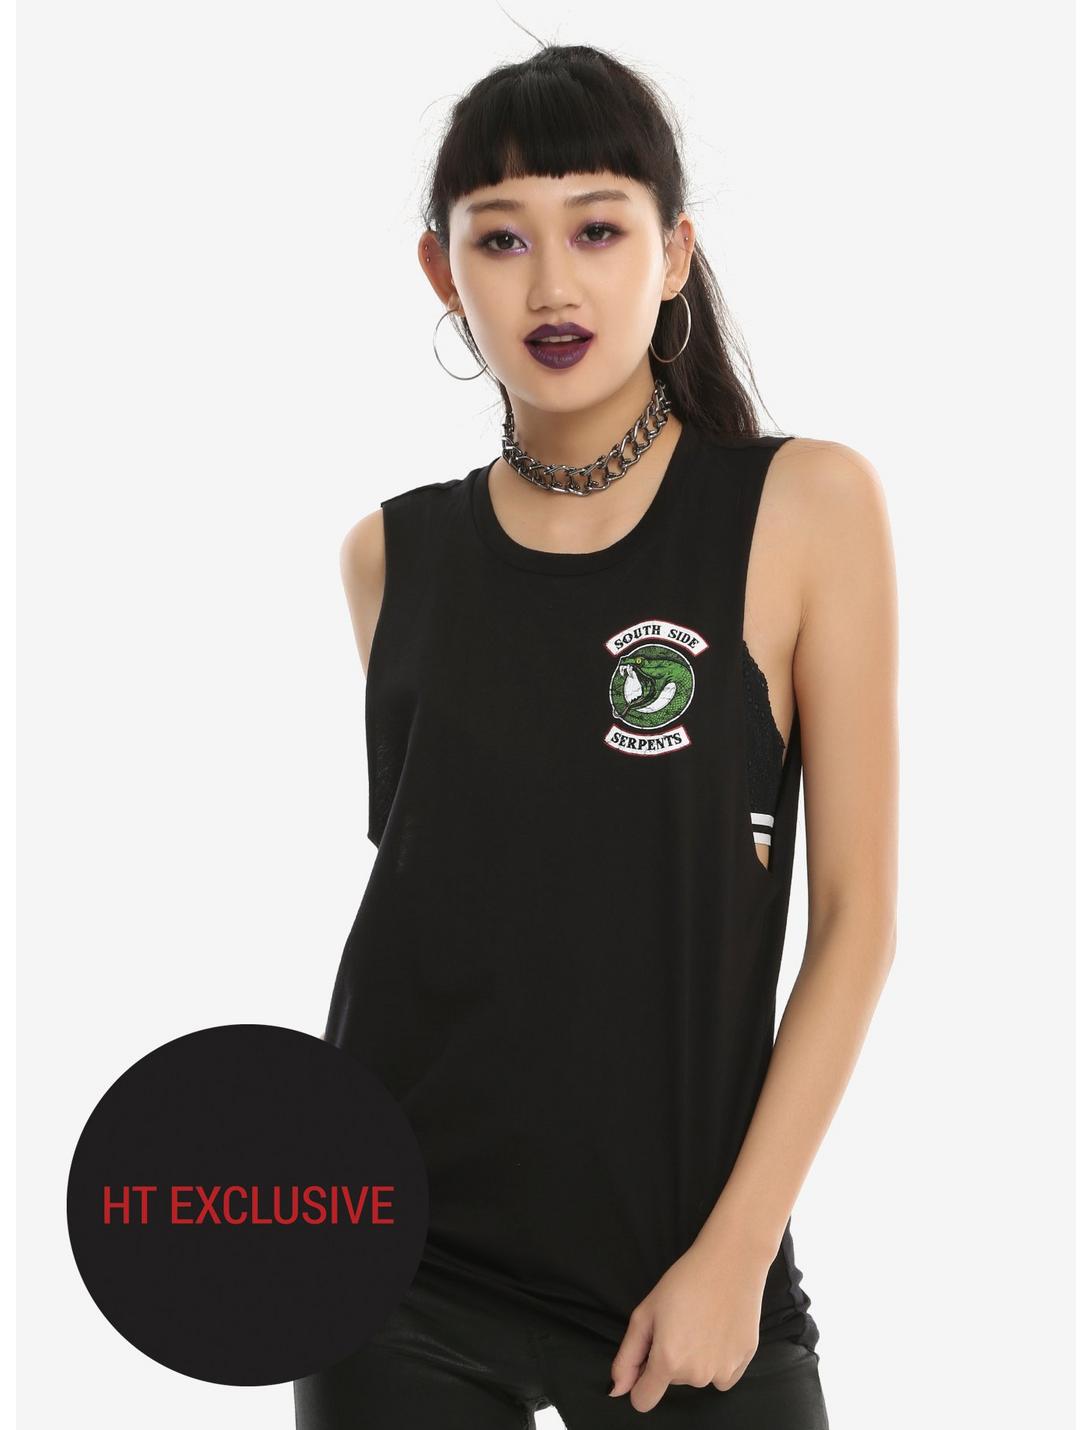 Riverdale Southside Serpents Girls Muscle Top Hot Topic Exclusive, BLACK, hi-res